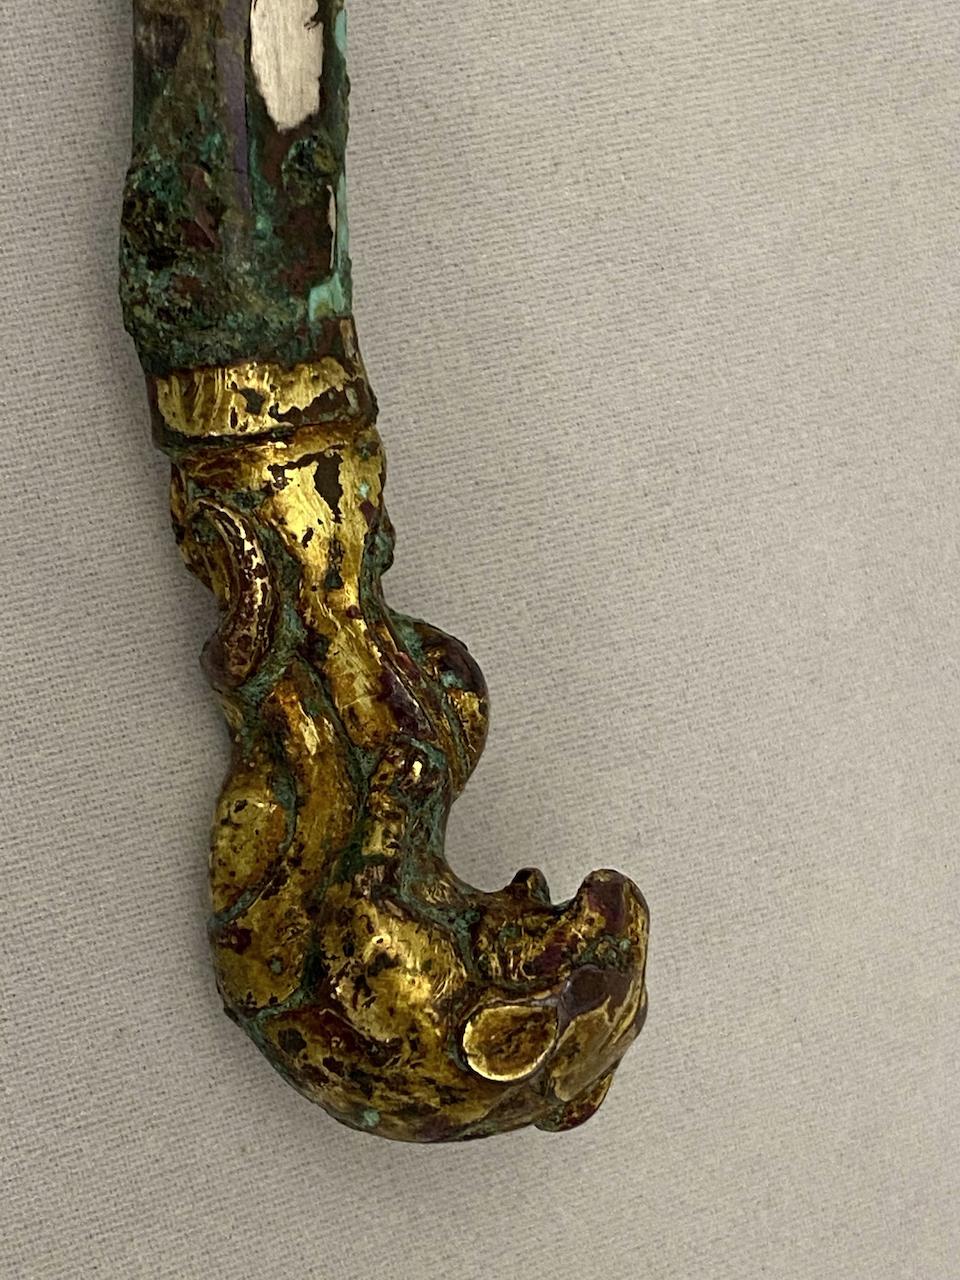 A fine and rare inlaid bronze garment hook  Warring States/Western Han period